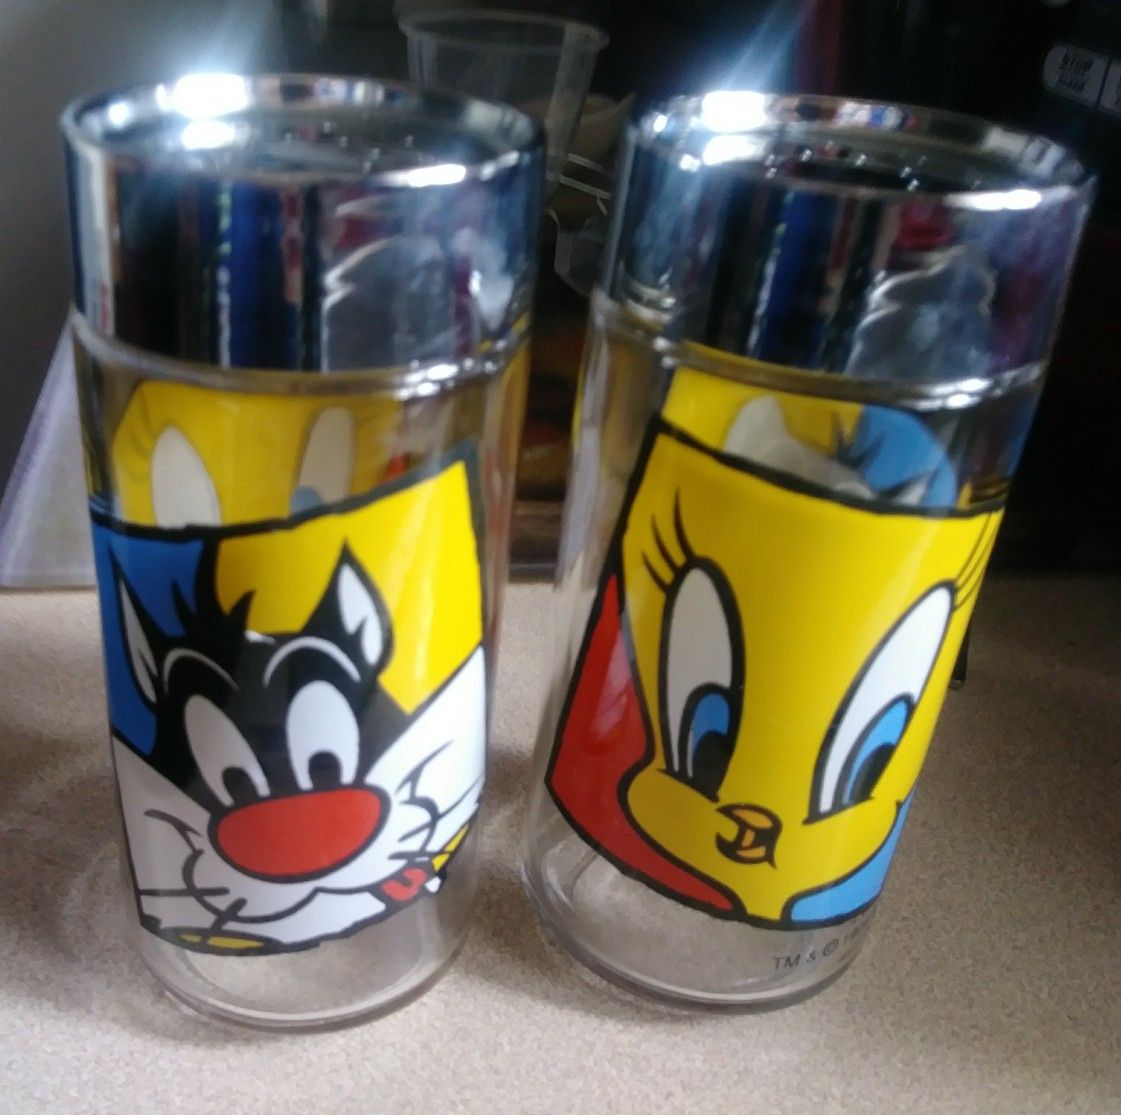 Sylvester and Tweety Bird Salt and Pepper Shakers